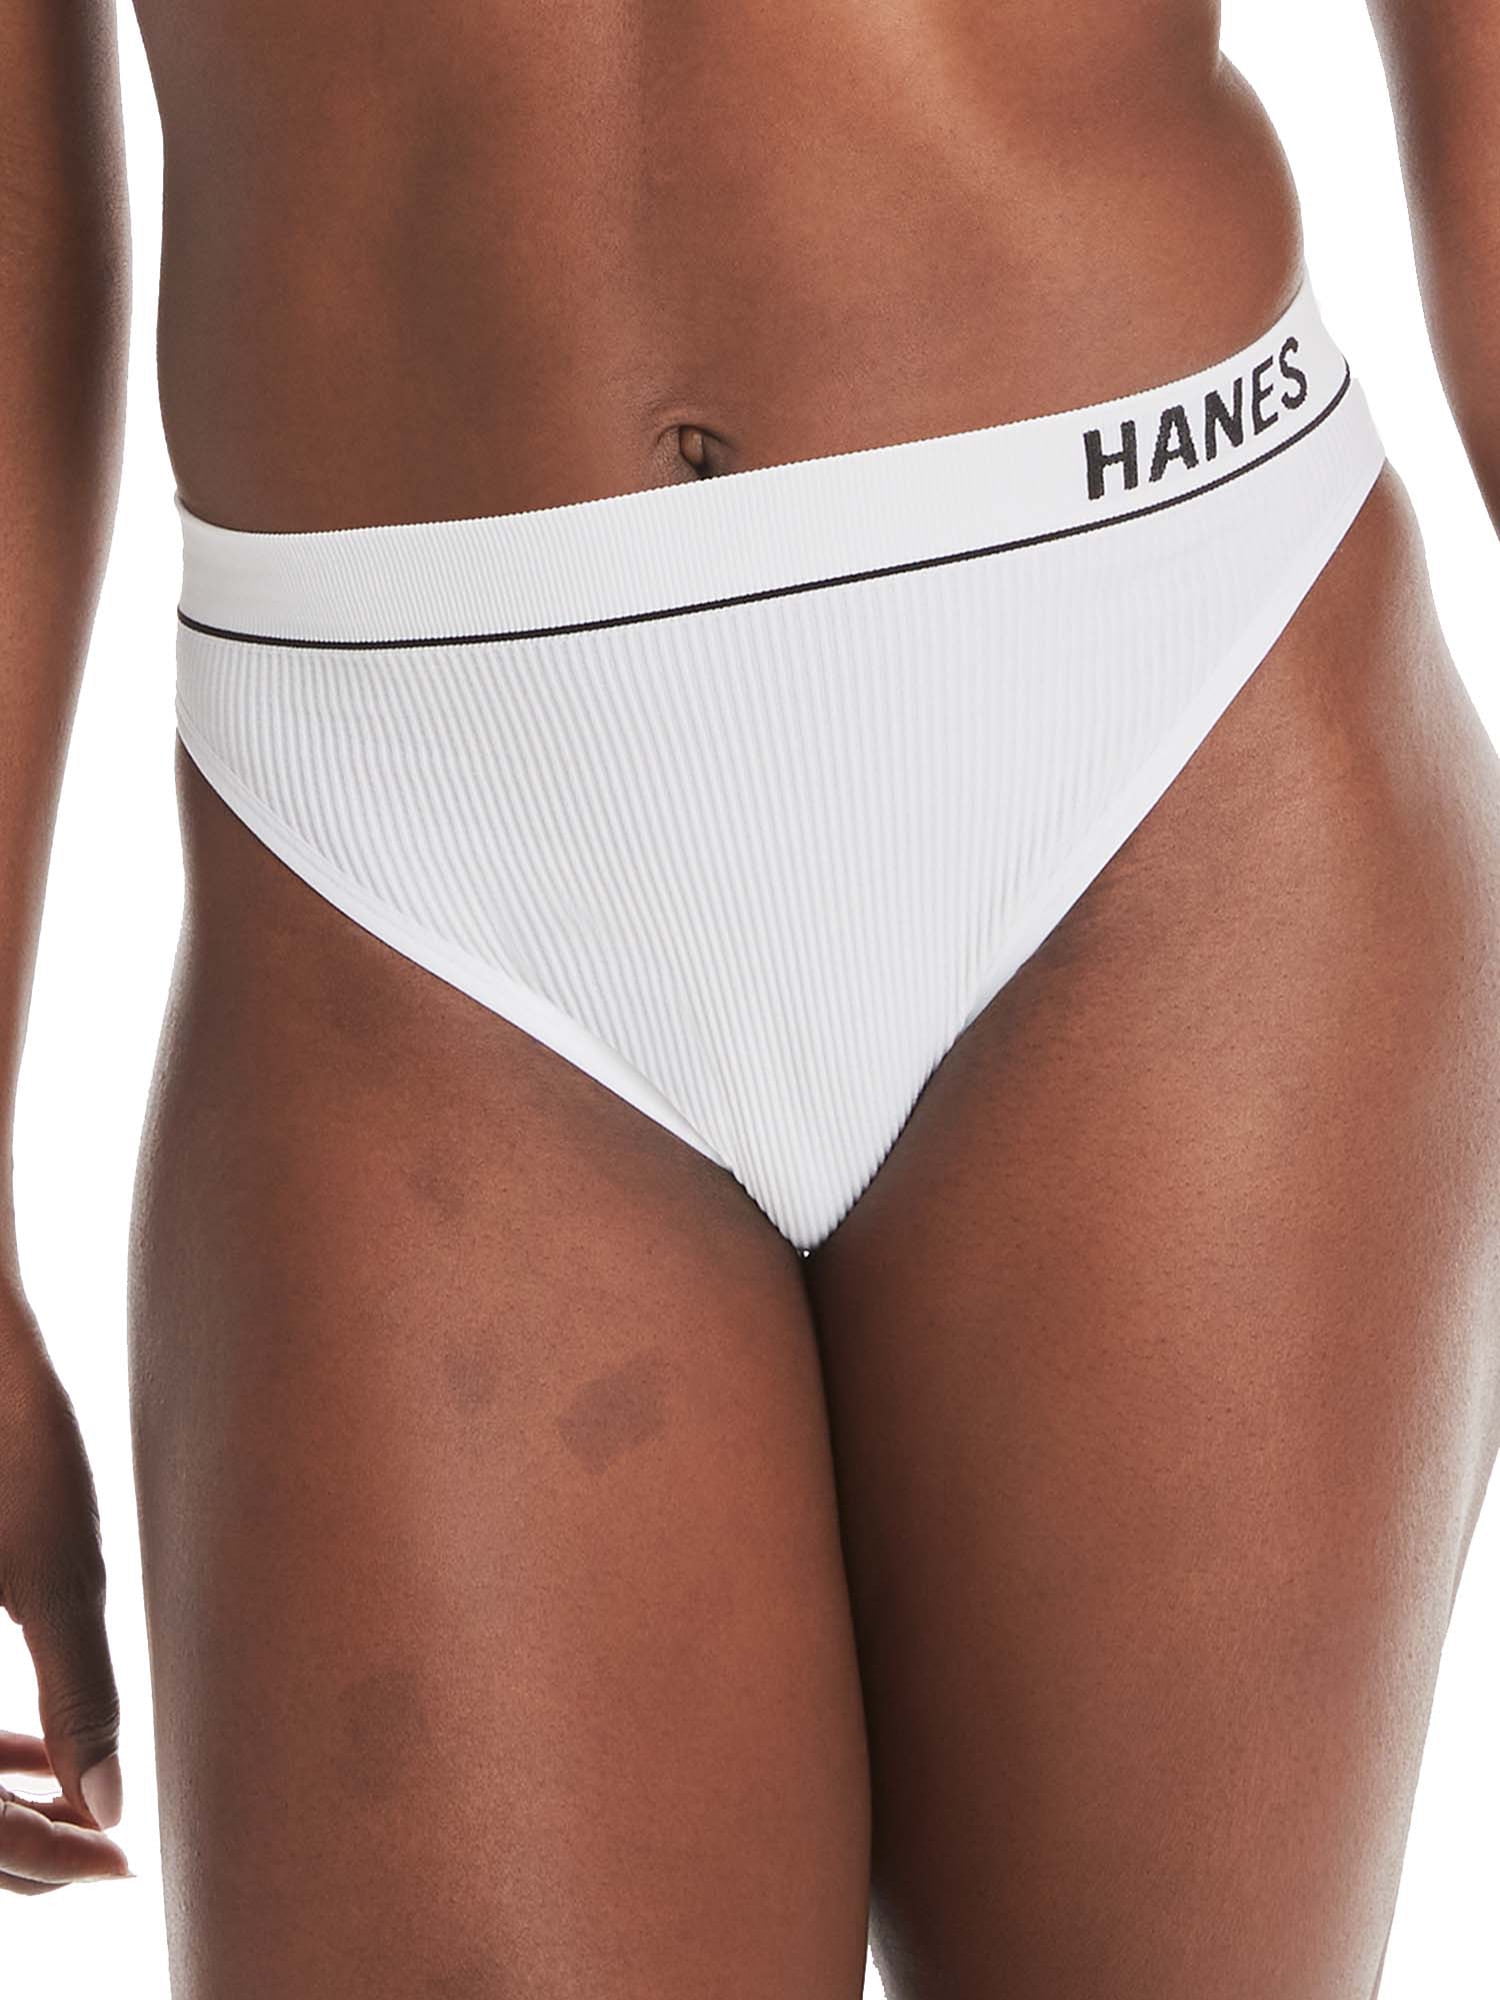 Hanes - Our new Hanes Classics Retro Rib collection is seriously da bomb.  This stretchy, seamless ribbed knit fabric is made from 50% recycled yarns.  ♻️ Shop now at Walmart. ✨ Shop